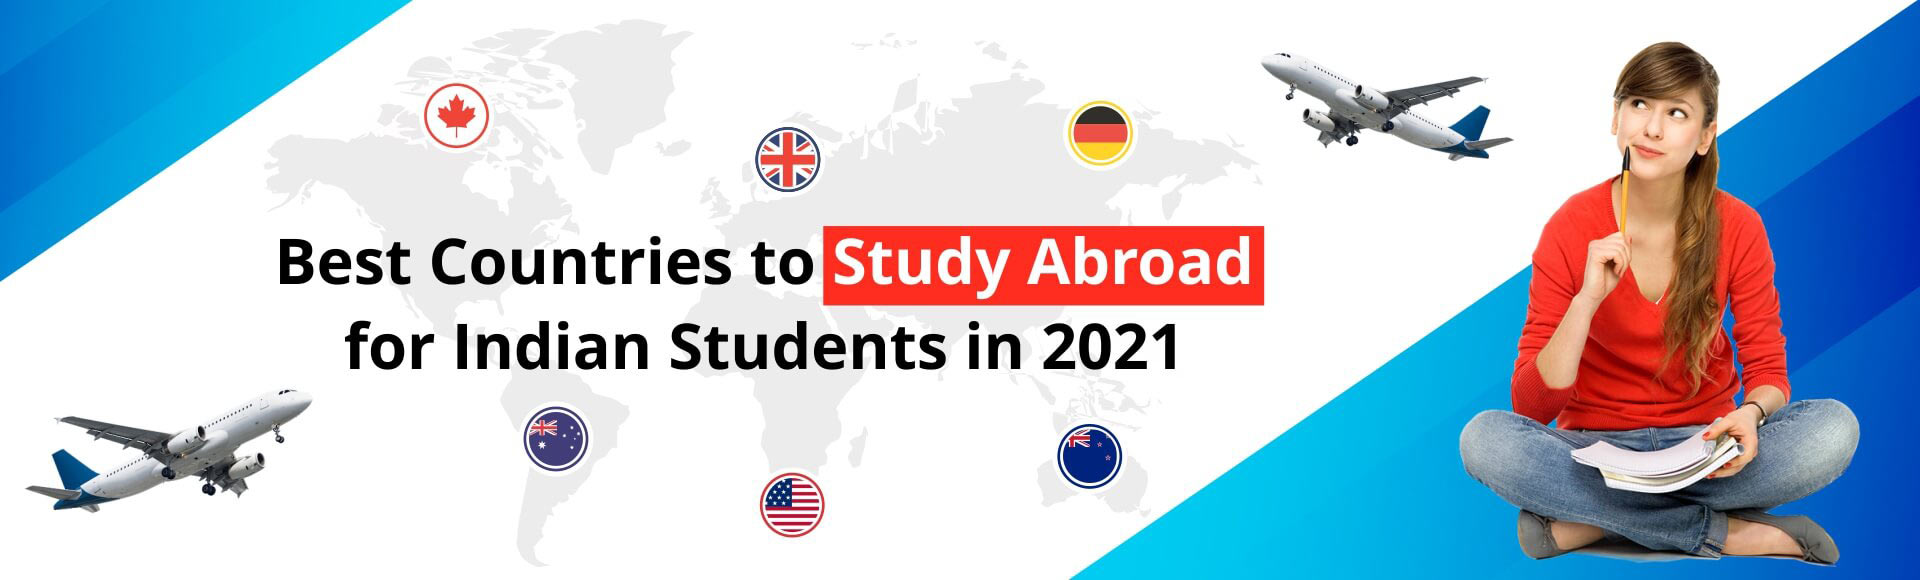 Best Countries to Study abroad for Indian students in 2021